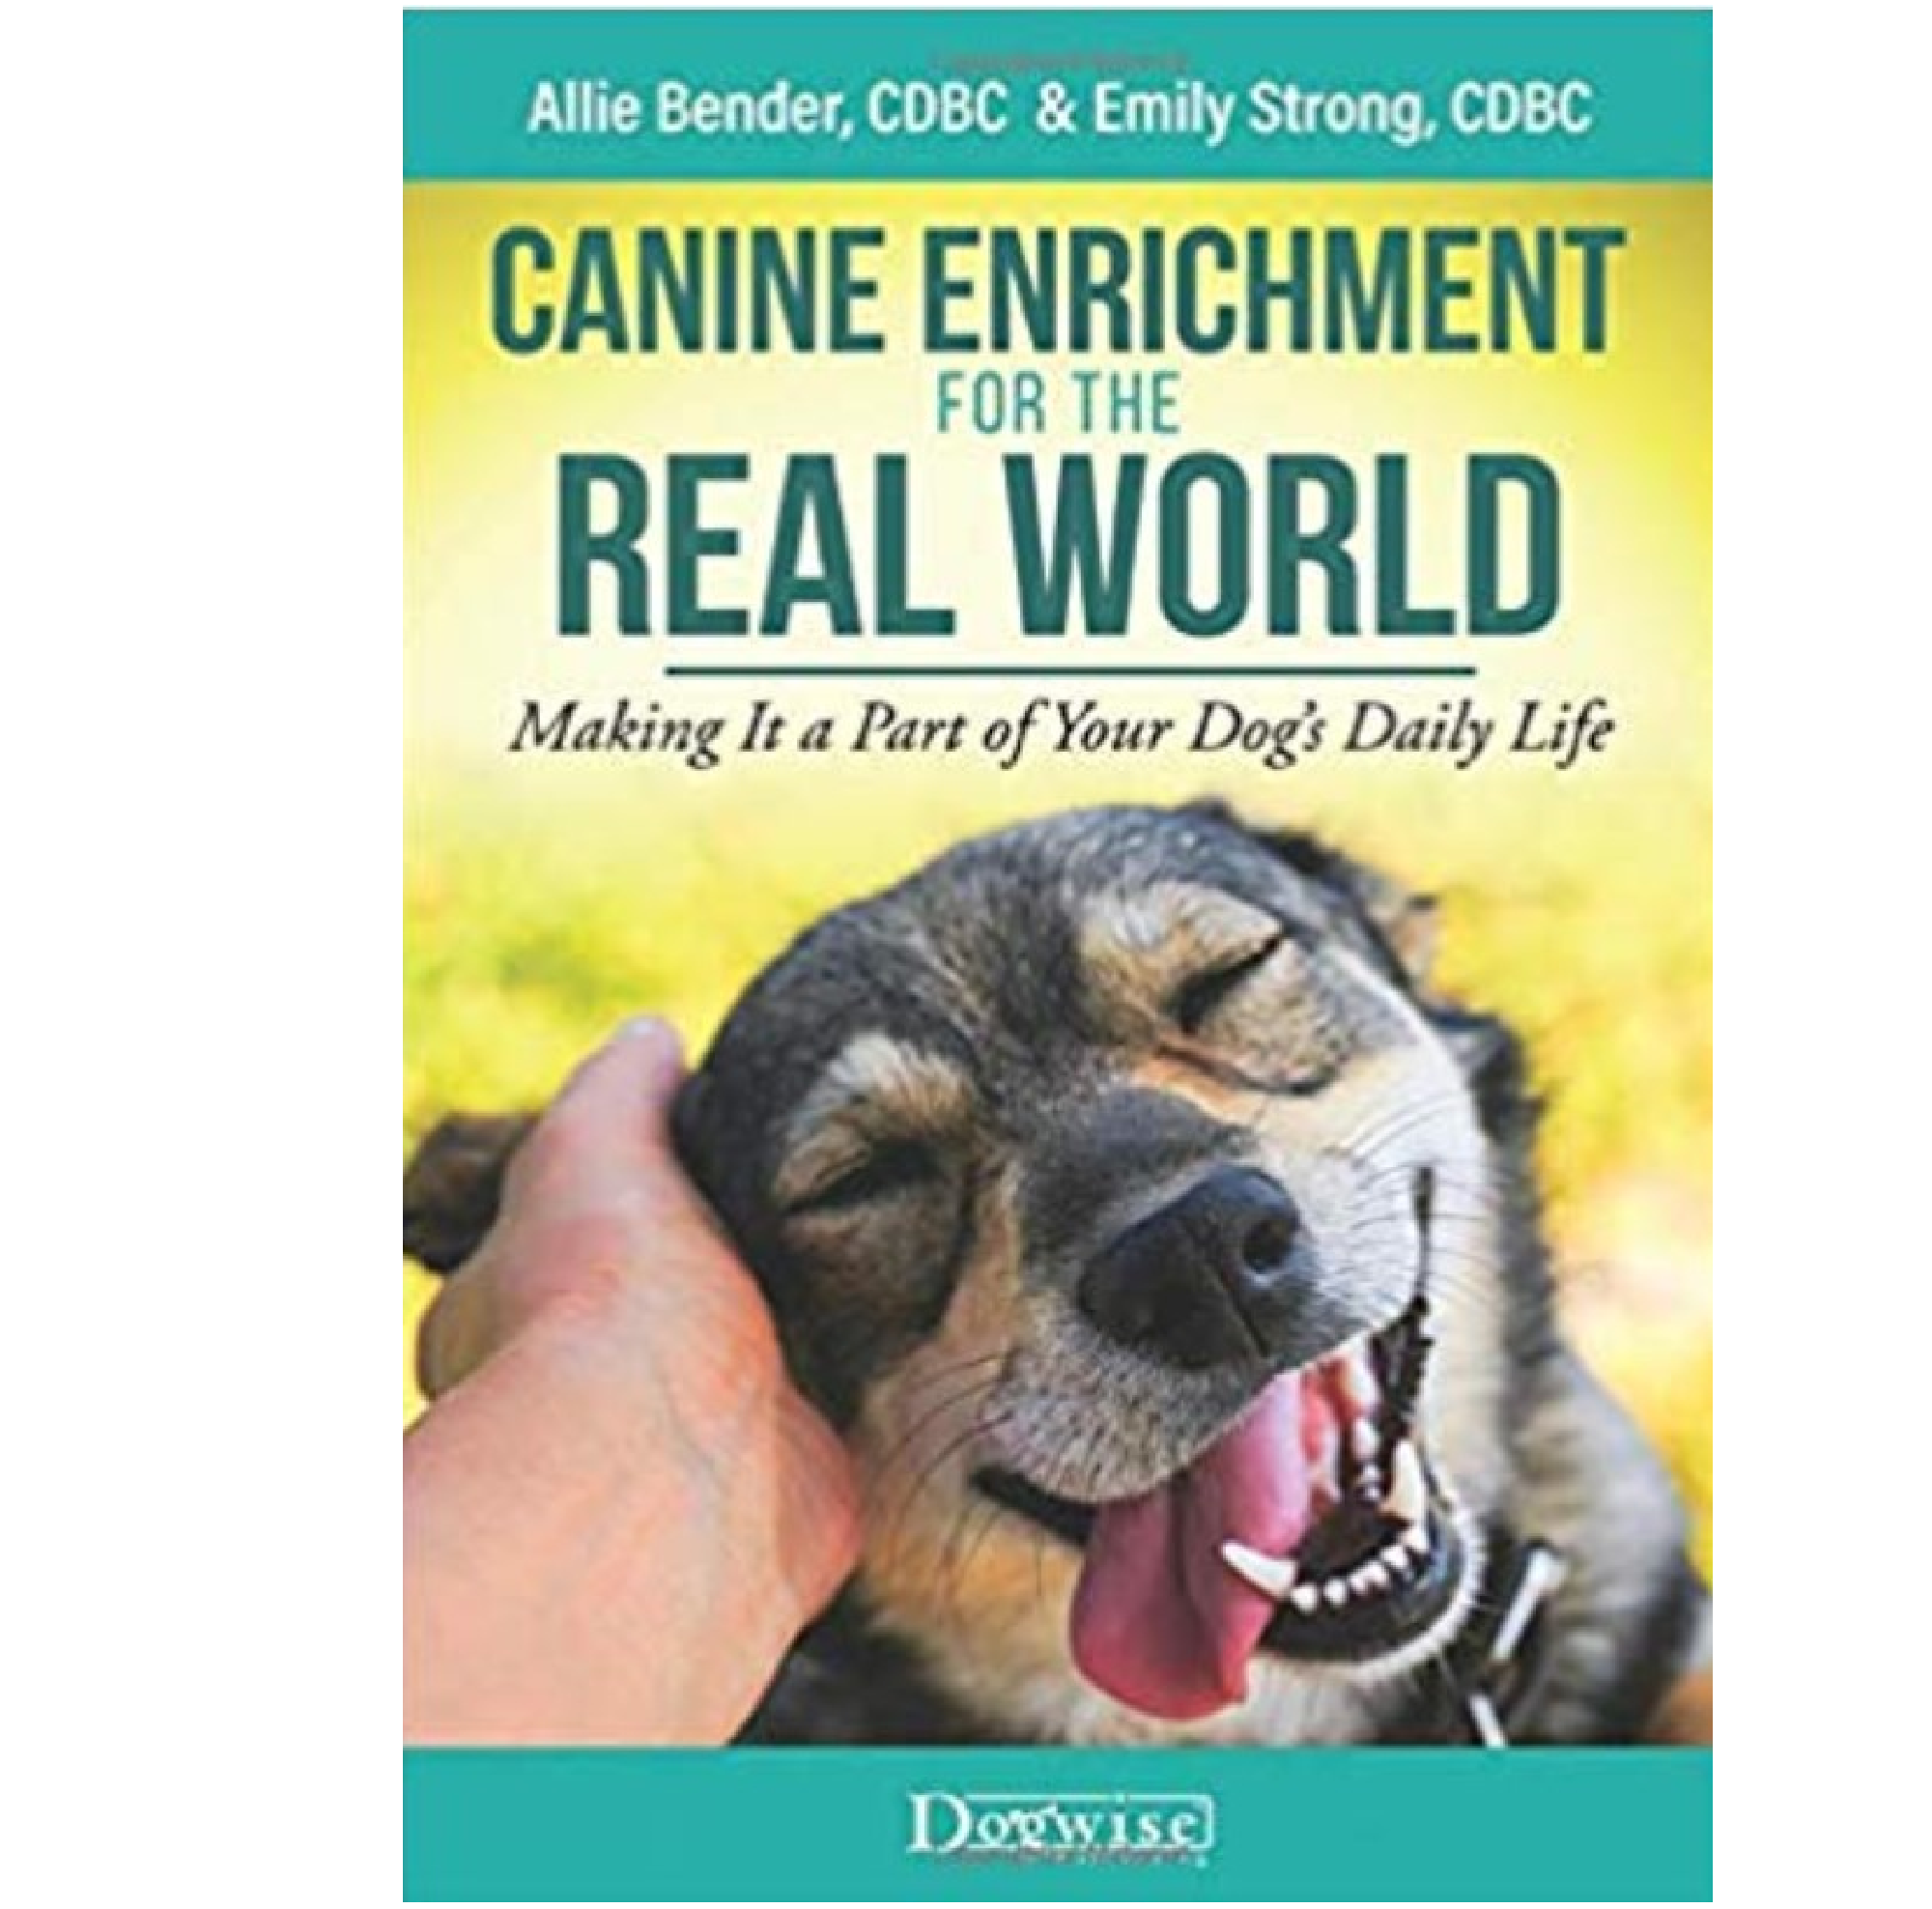 Canine Enrichment for the Real World